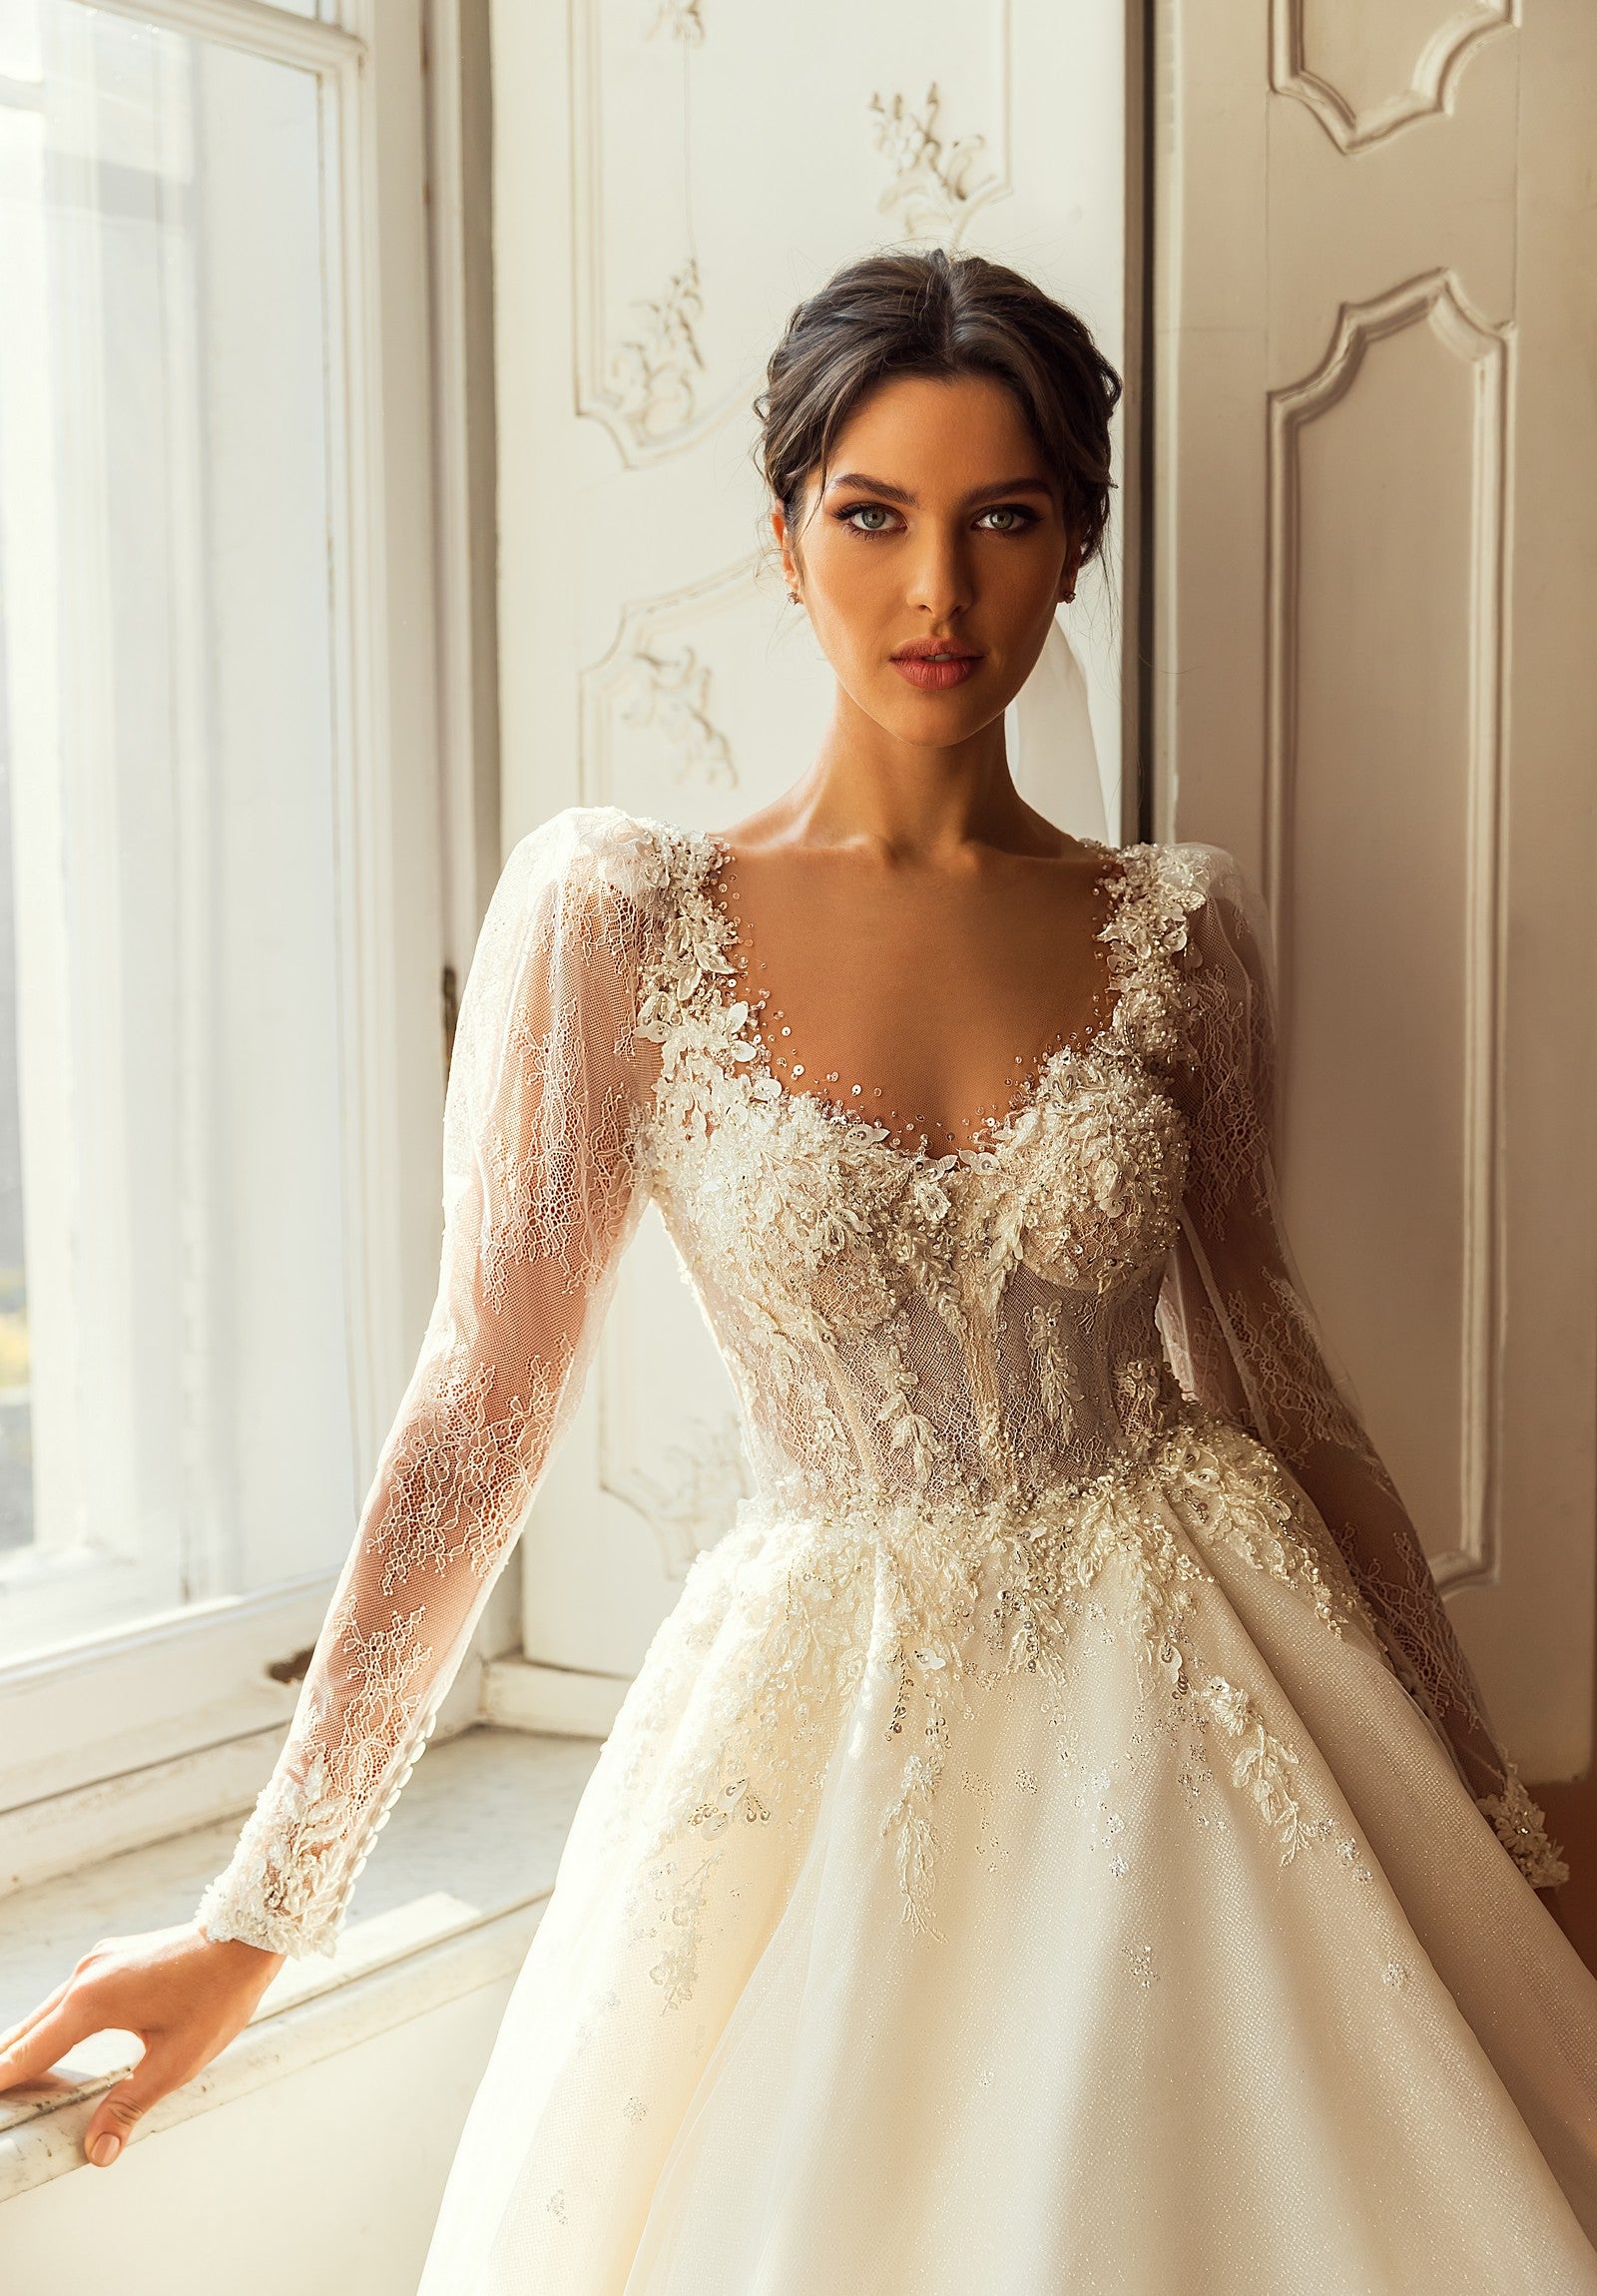 5 Places to Shop in Ottawa for Wedding Dresses - Amy Pinder Photography Blog